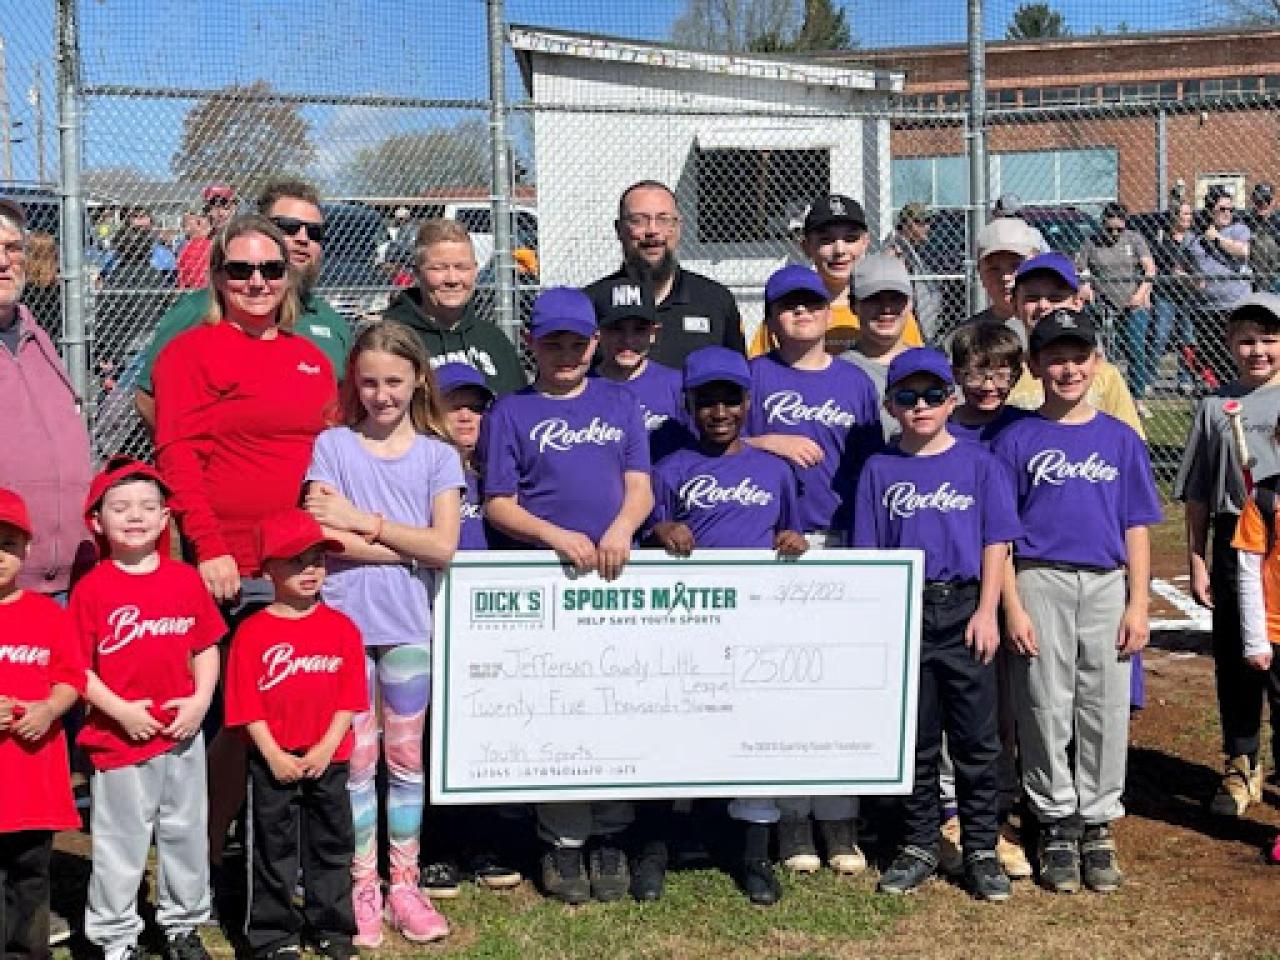 Jefferson County Little League presented with $25,000 Sports Matter Grant.